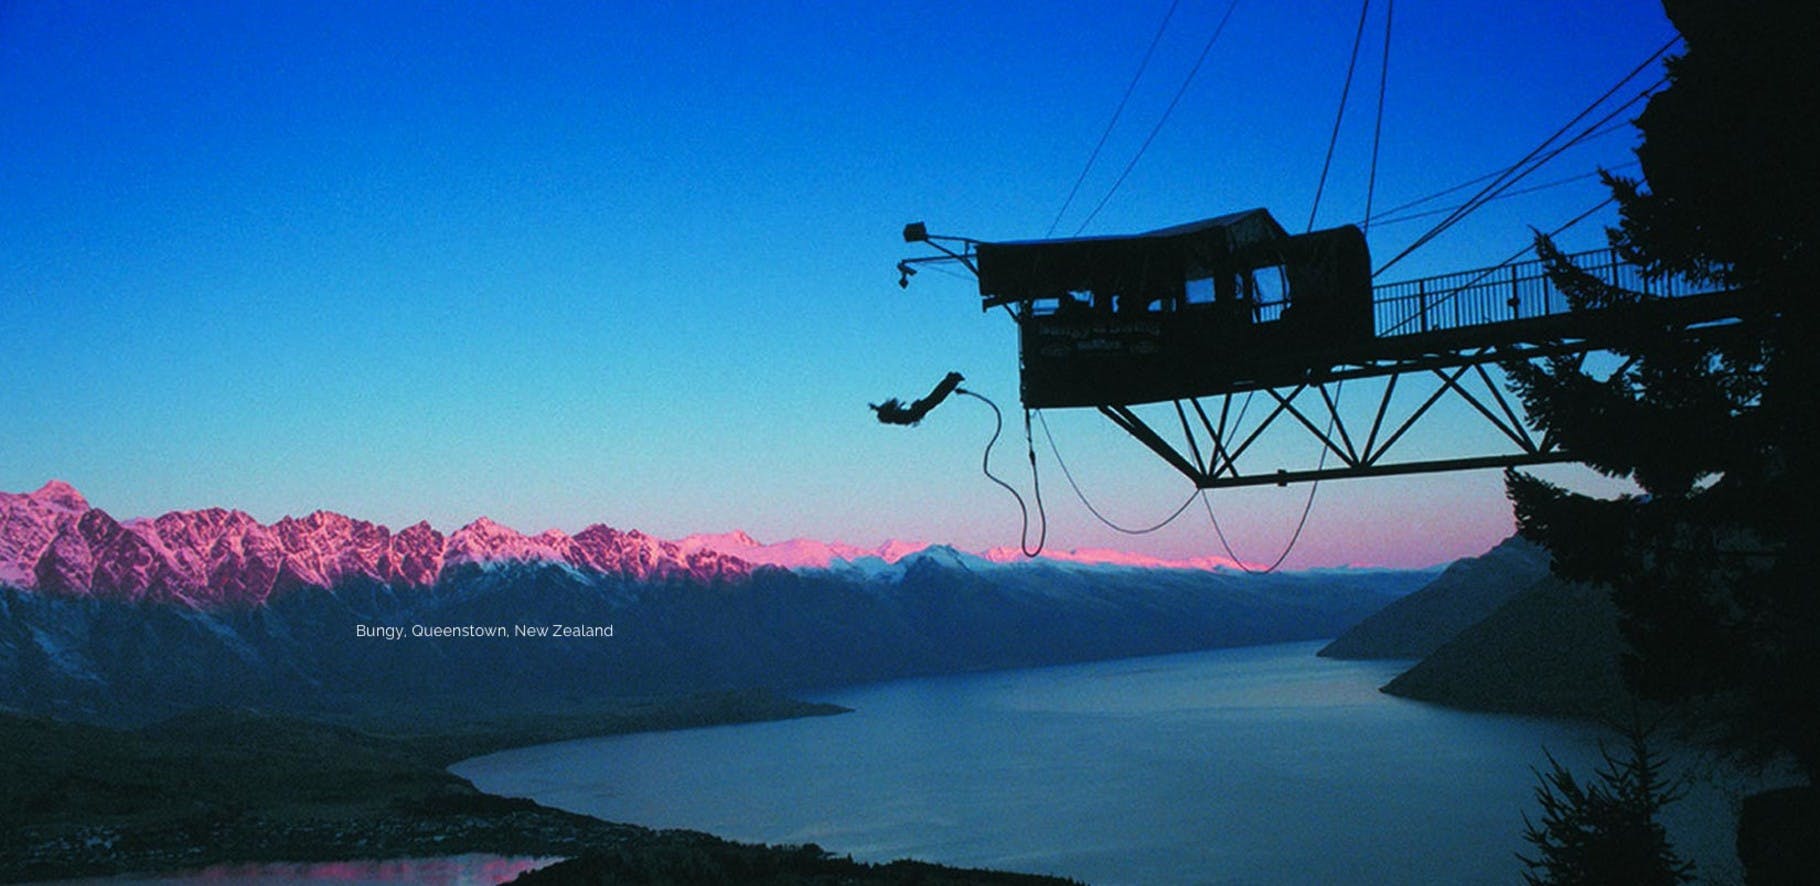 Black silhouette of a person bungy jumping from a tower, over looking a beautiful mountain range and lake at dusk.